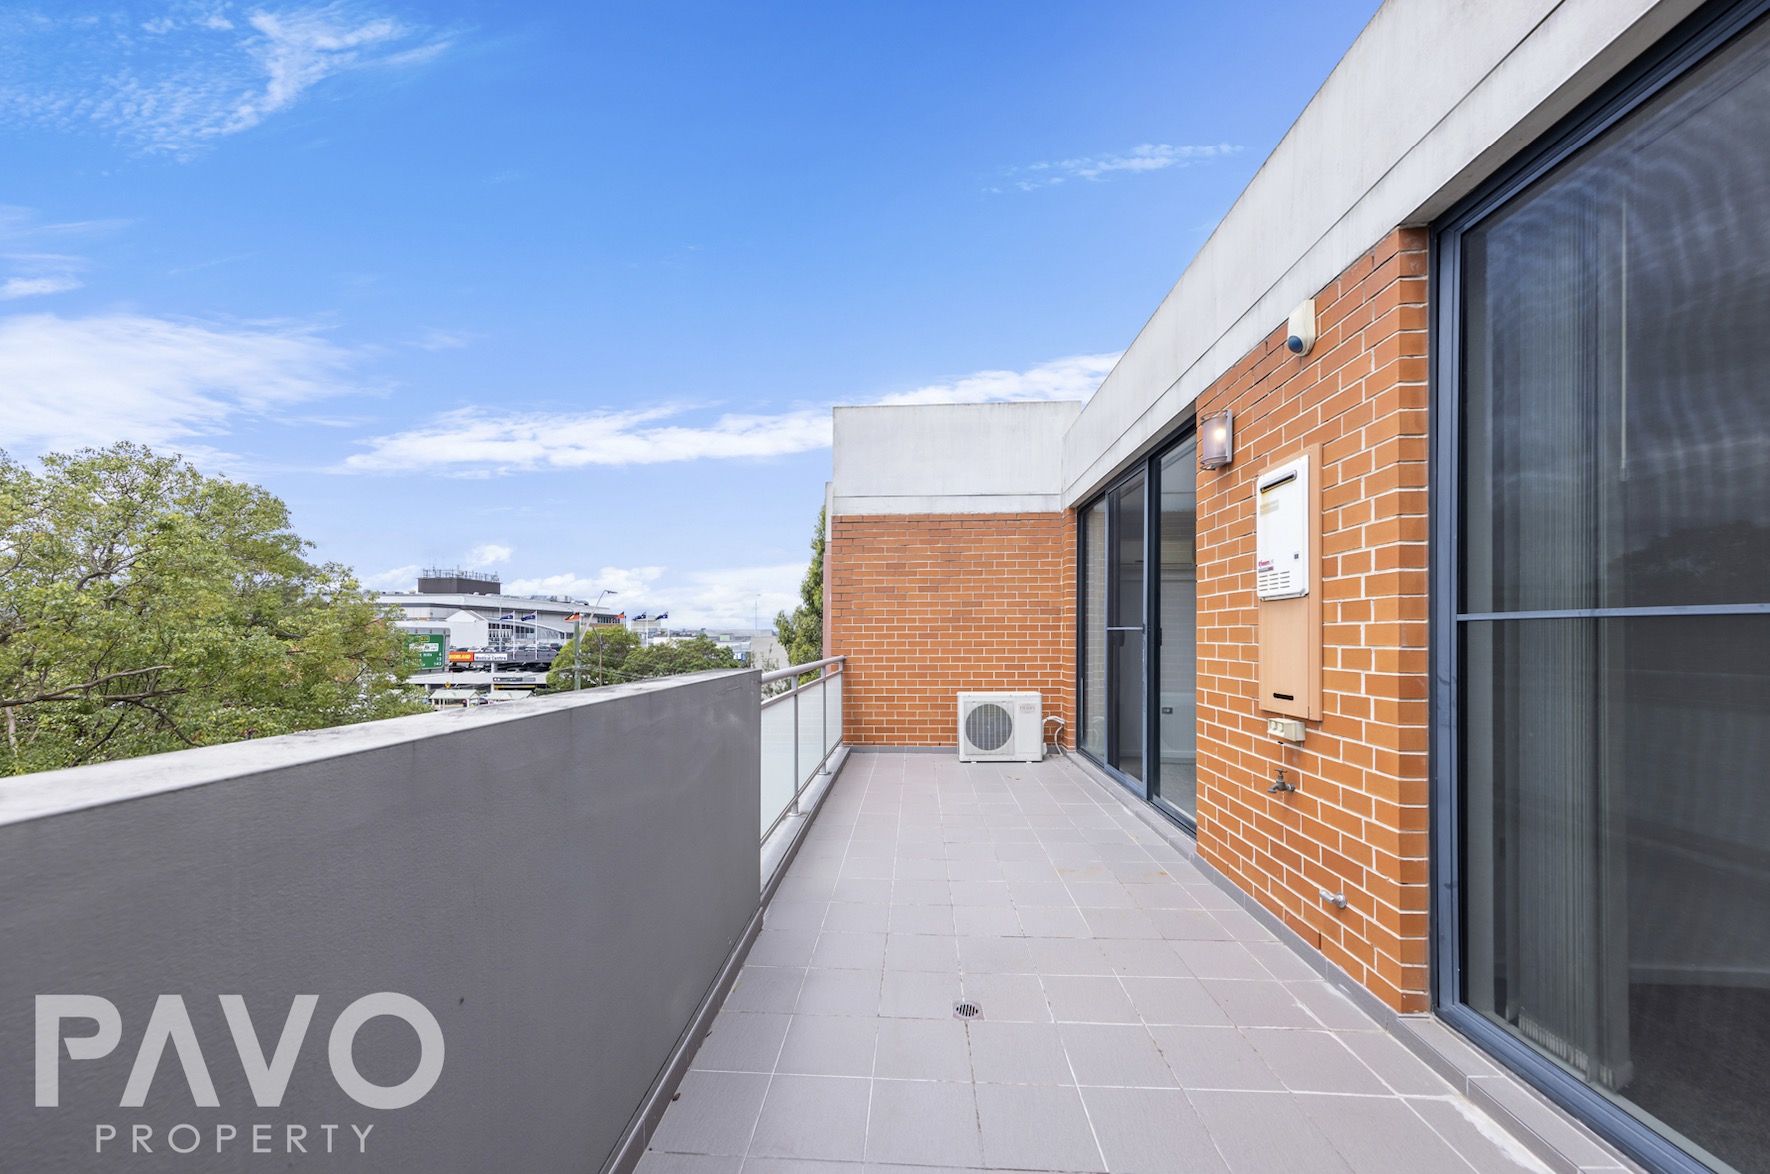 Carlingford, New South Wales 2118, 2 Bedrooms Bedrooms, ,2 BathroomsBathrooms,Apartment,For Sale,1019